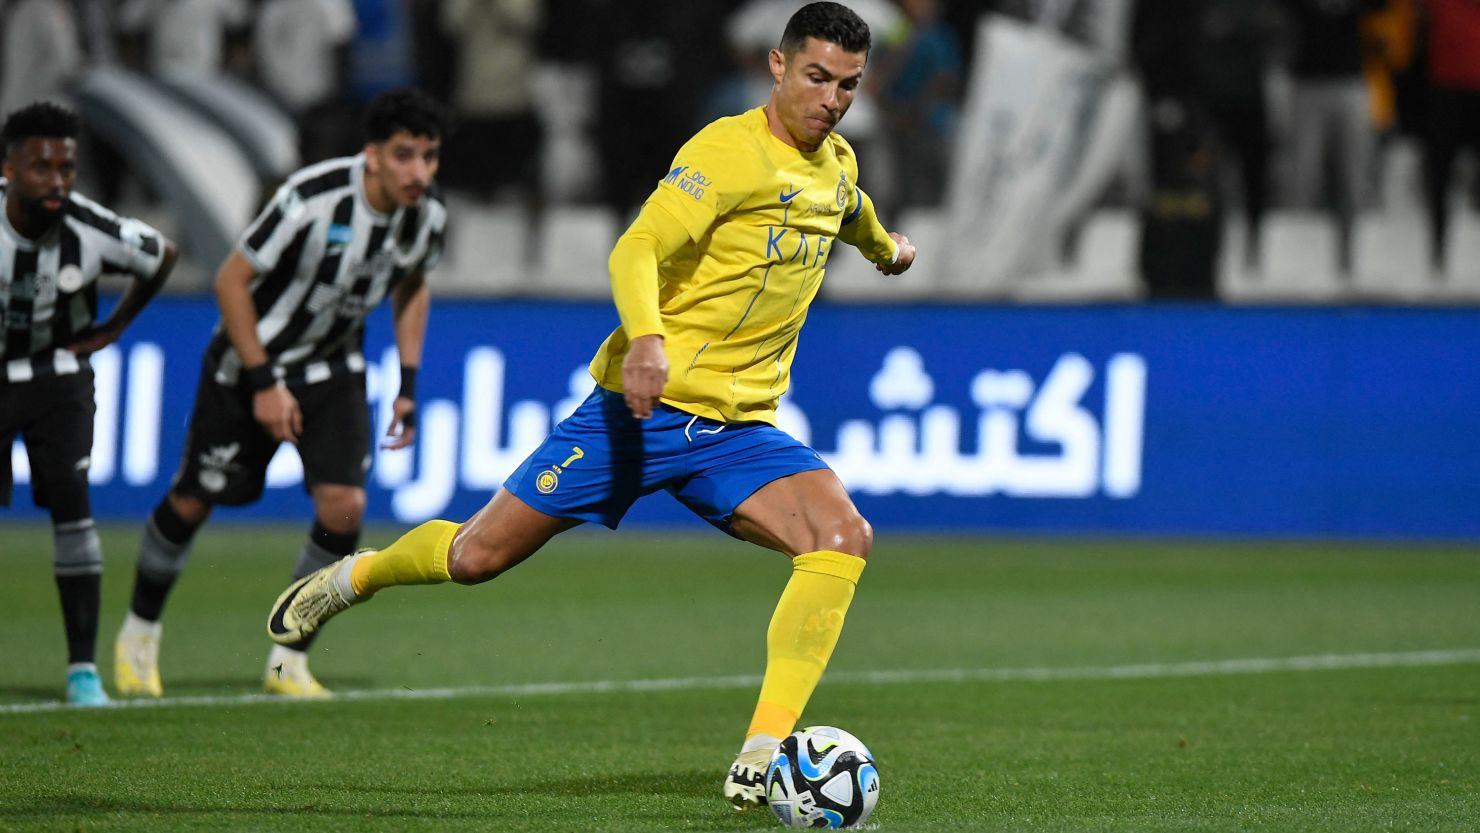 Ronaldo scores from the penalty spot against Al-Shabab.